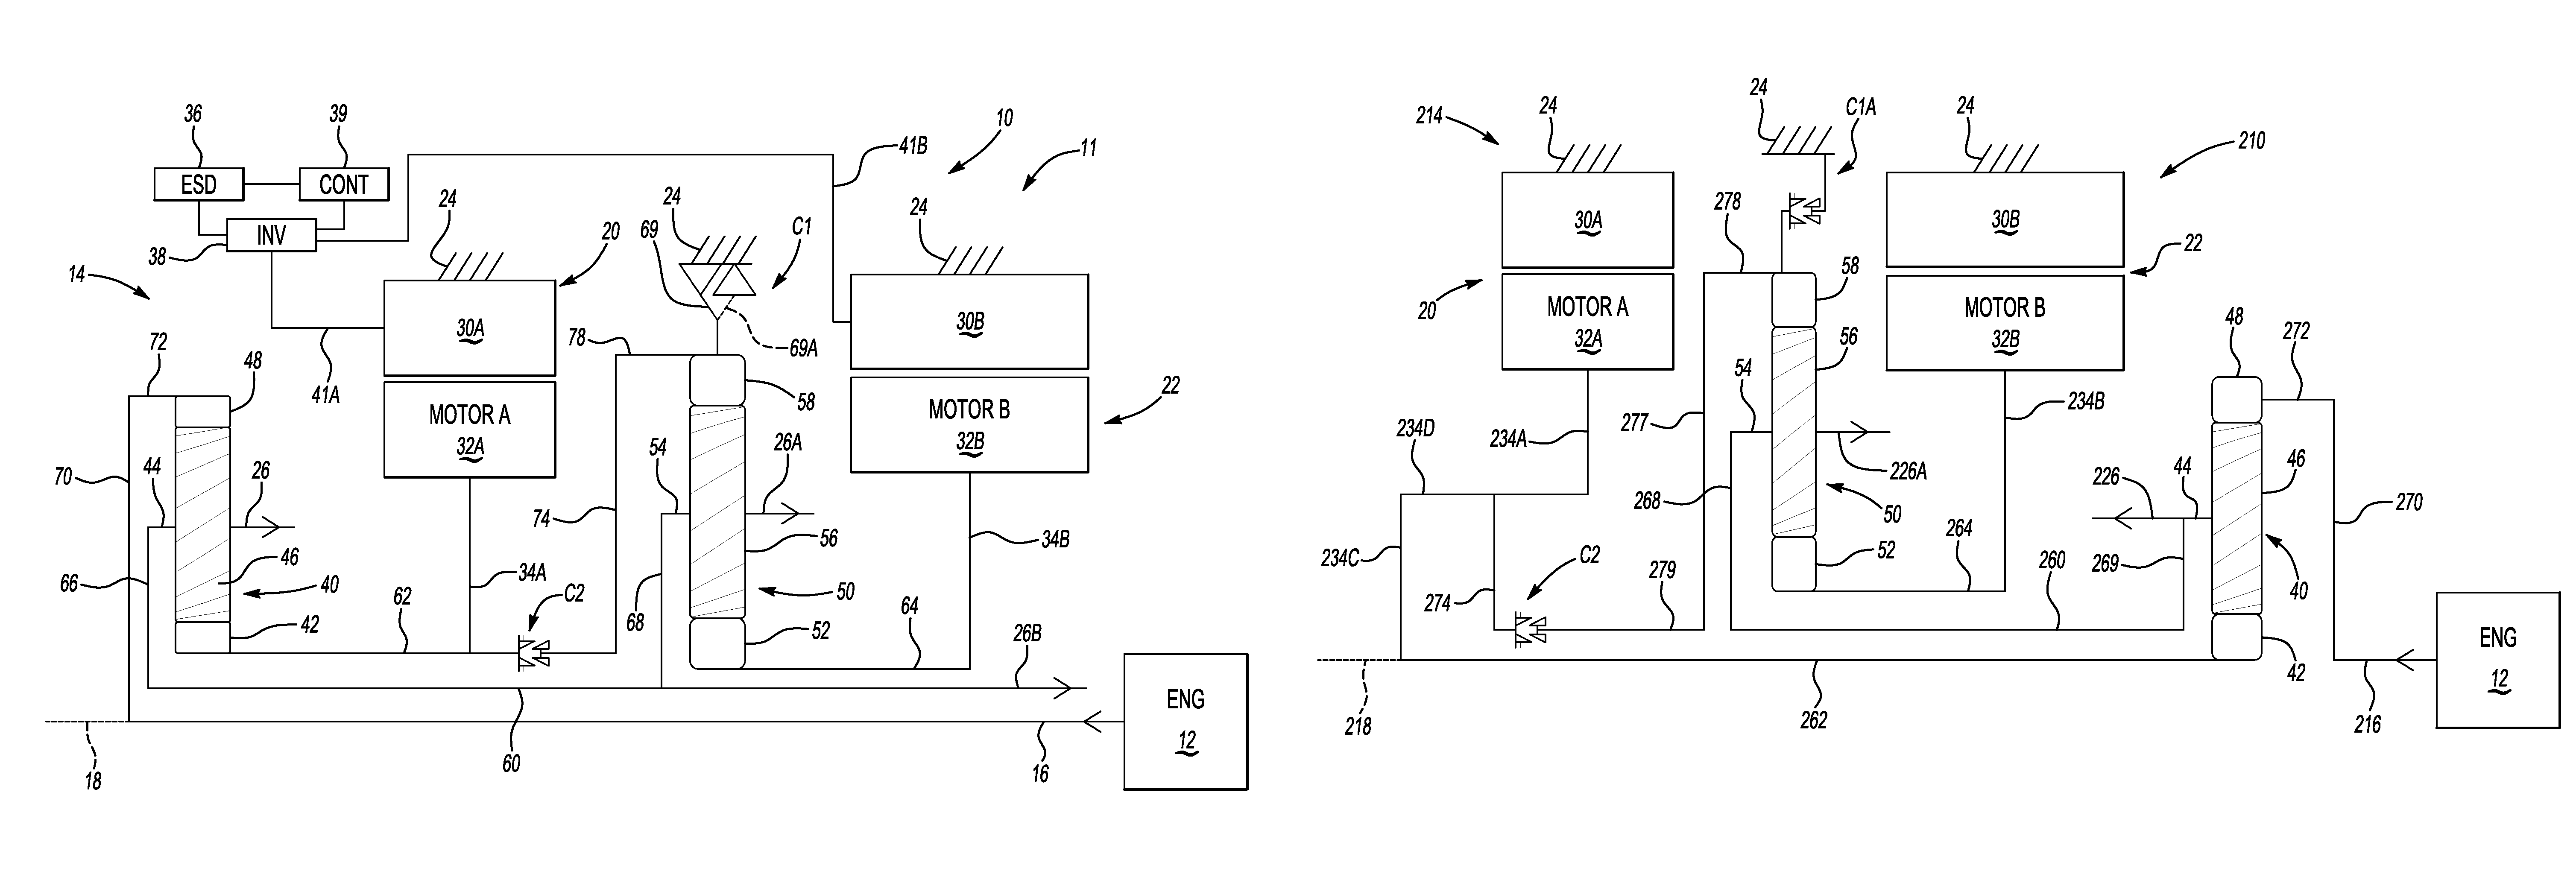 Clutch arrangements for an electrically-variable transmission